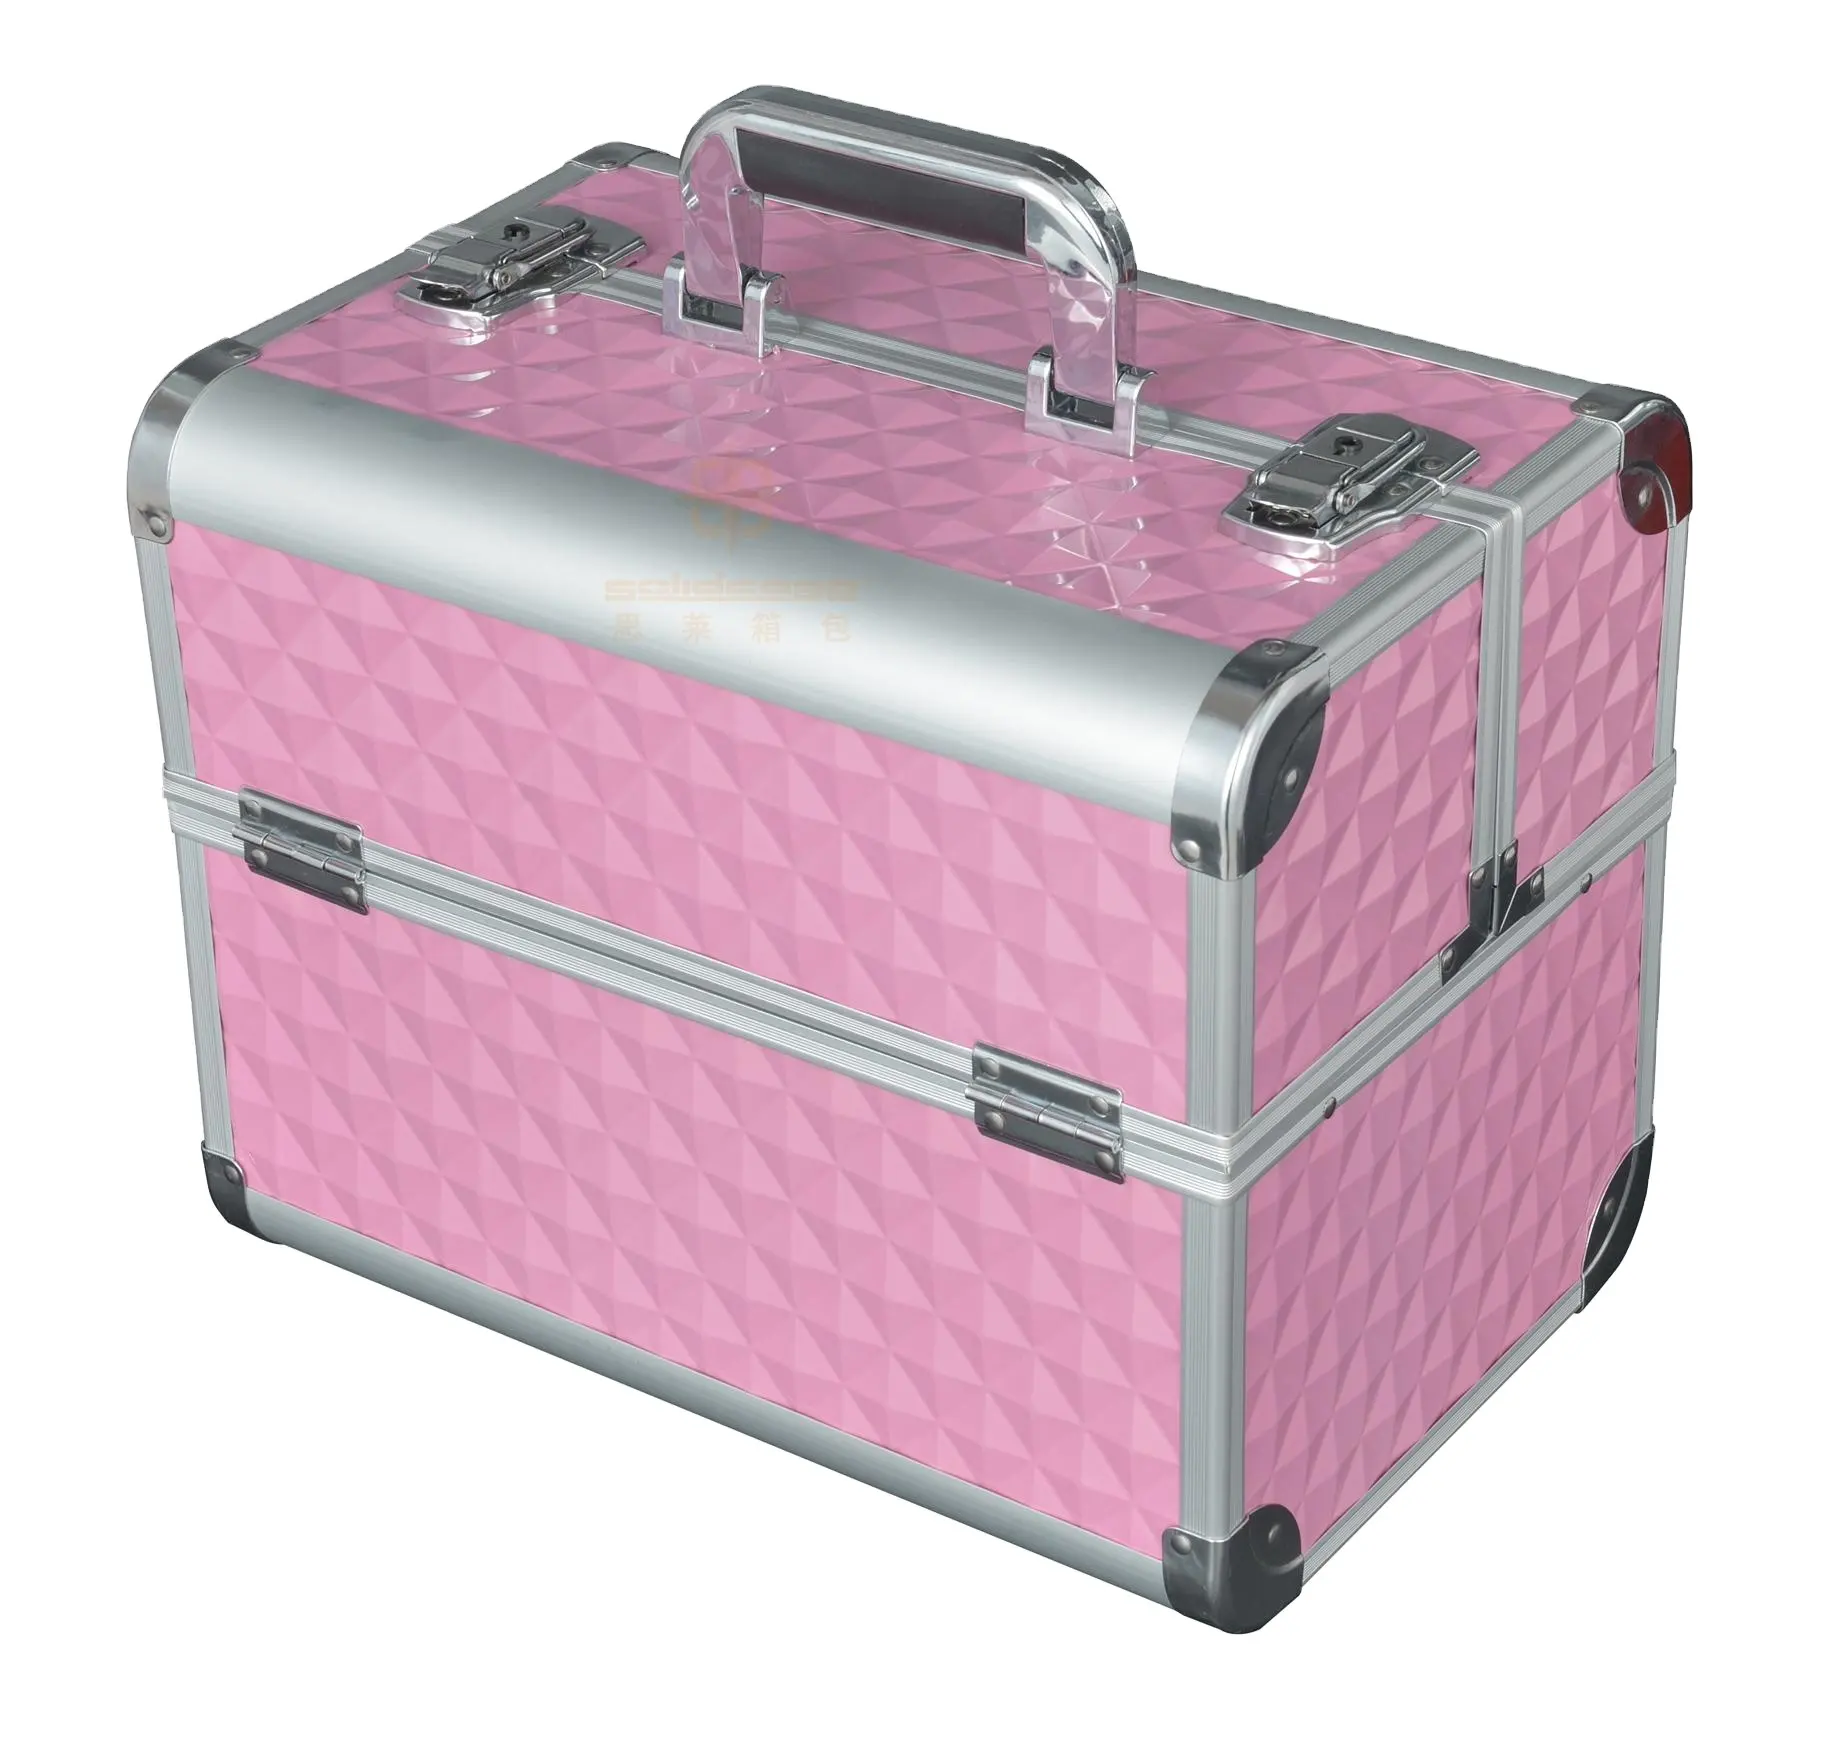 Professional Rolling Makeup Train Case on wheels Lockable Artist Makeup Cosmetic Case holiday gift blakcfriday